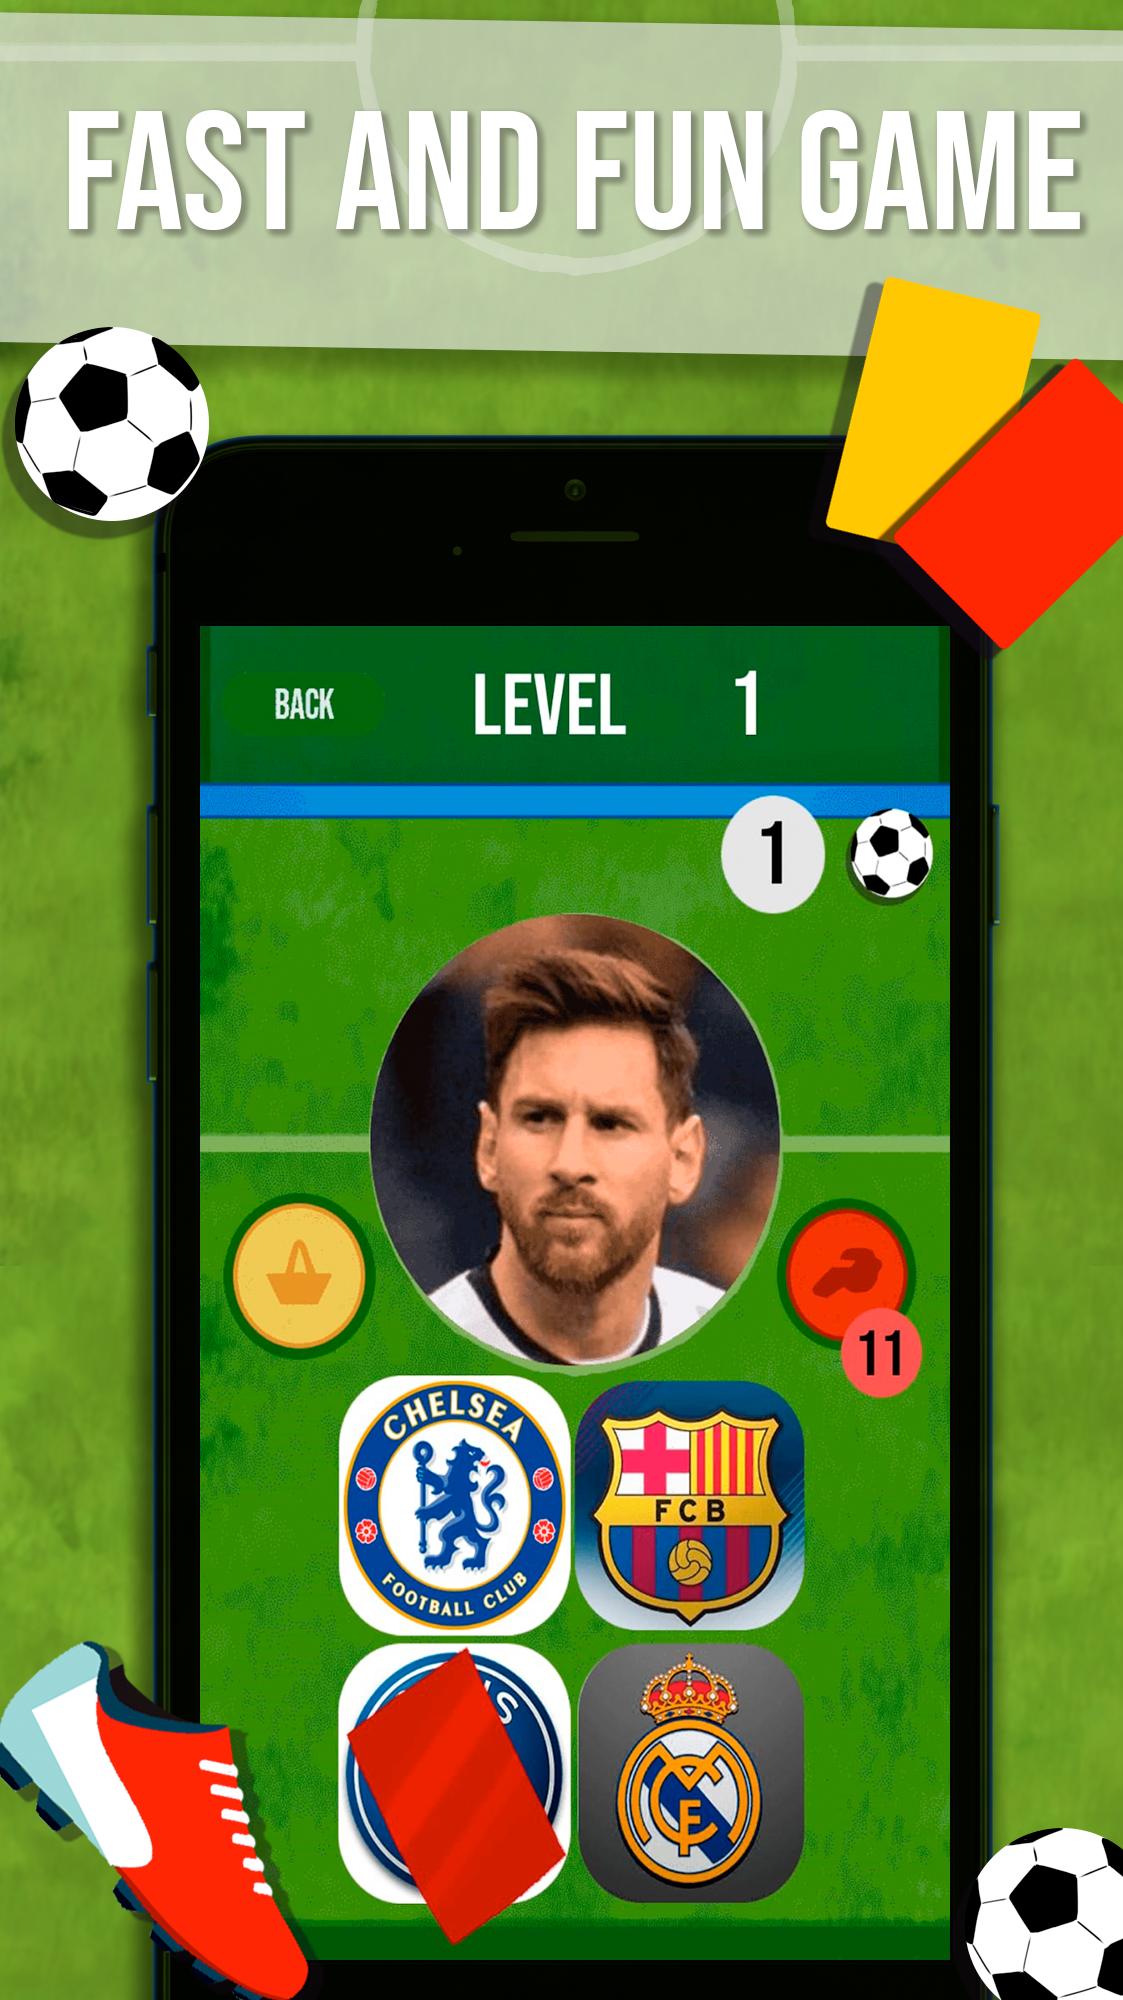 Football Quiz for Android - APK Download - 